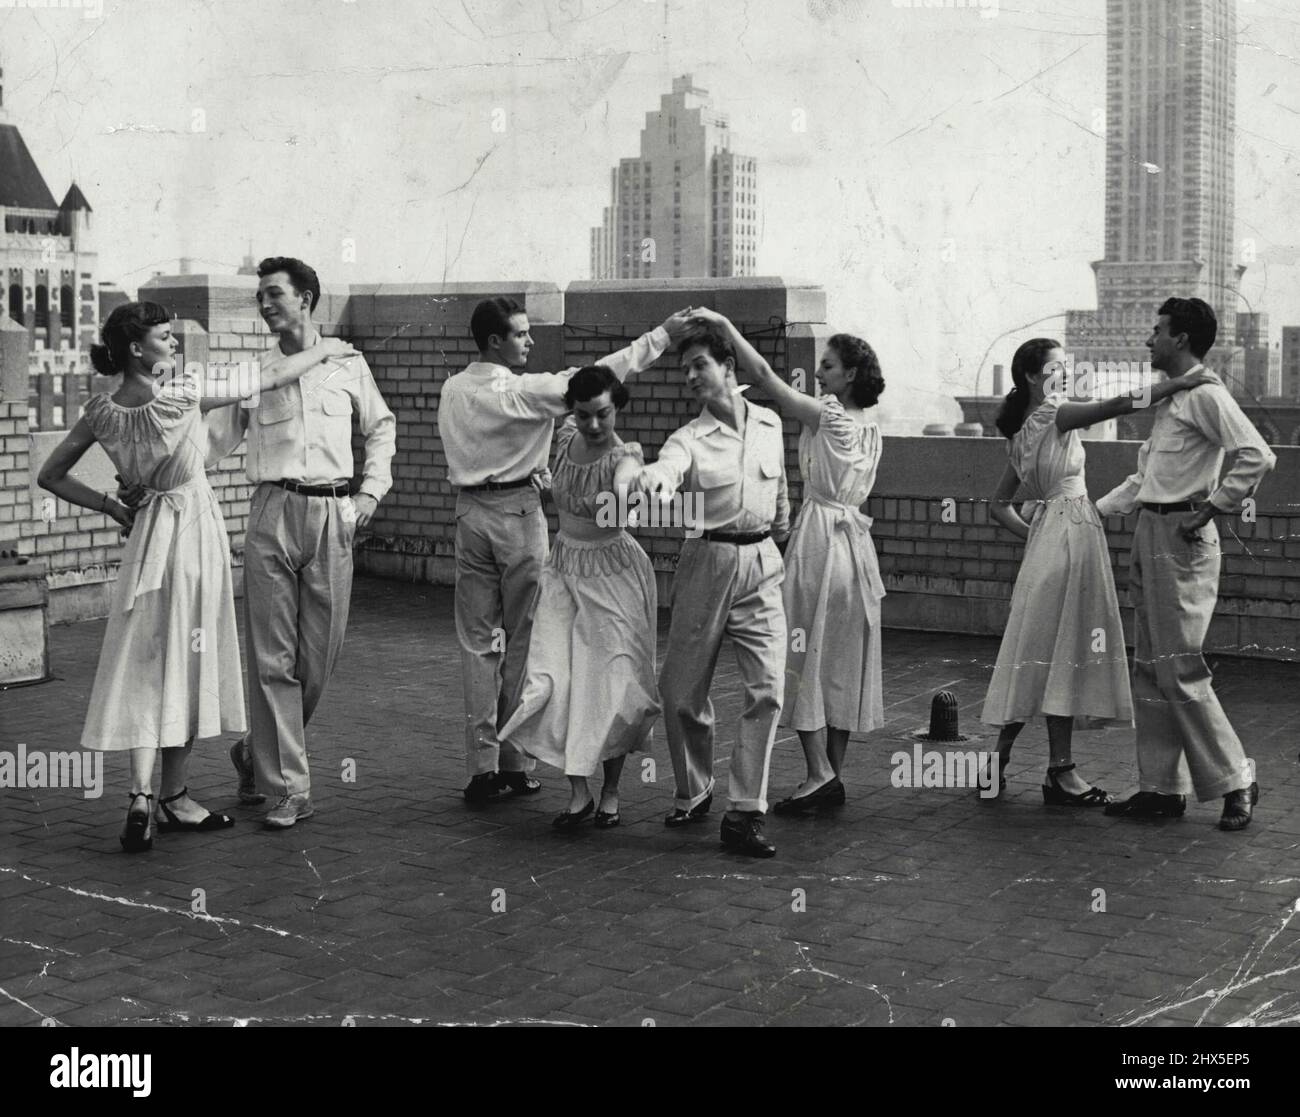 The square dance craze has hit many suburban homes. When there's not enough room inside, or just for the fun of it, square dancers adjourn to the roof, where they square among festoon lights and washing lines. June 29, 1950. (Photo by Paul Schumach, Metropolitan Photo Service). Stock Photo